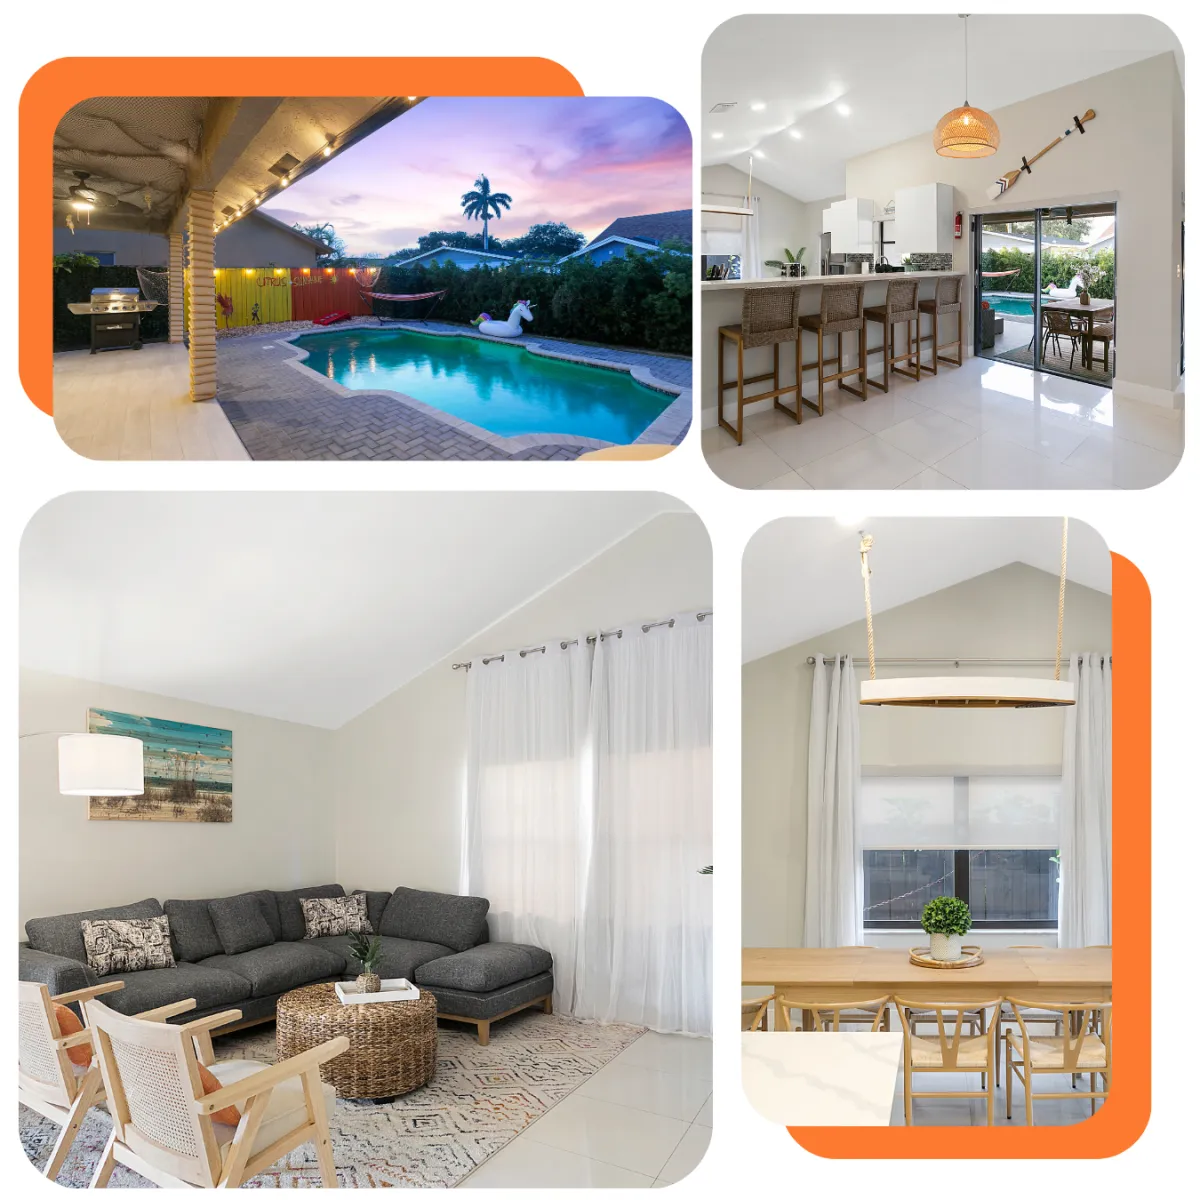 Citrus Villa Stay: Luxurious getaway with four bedrooms, a modern kitchen, and a heated outdoor pool. Nestled in a tranquil neighborhood, yet close to beaches, shops, and restaurants.